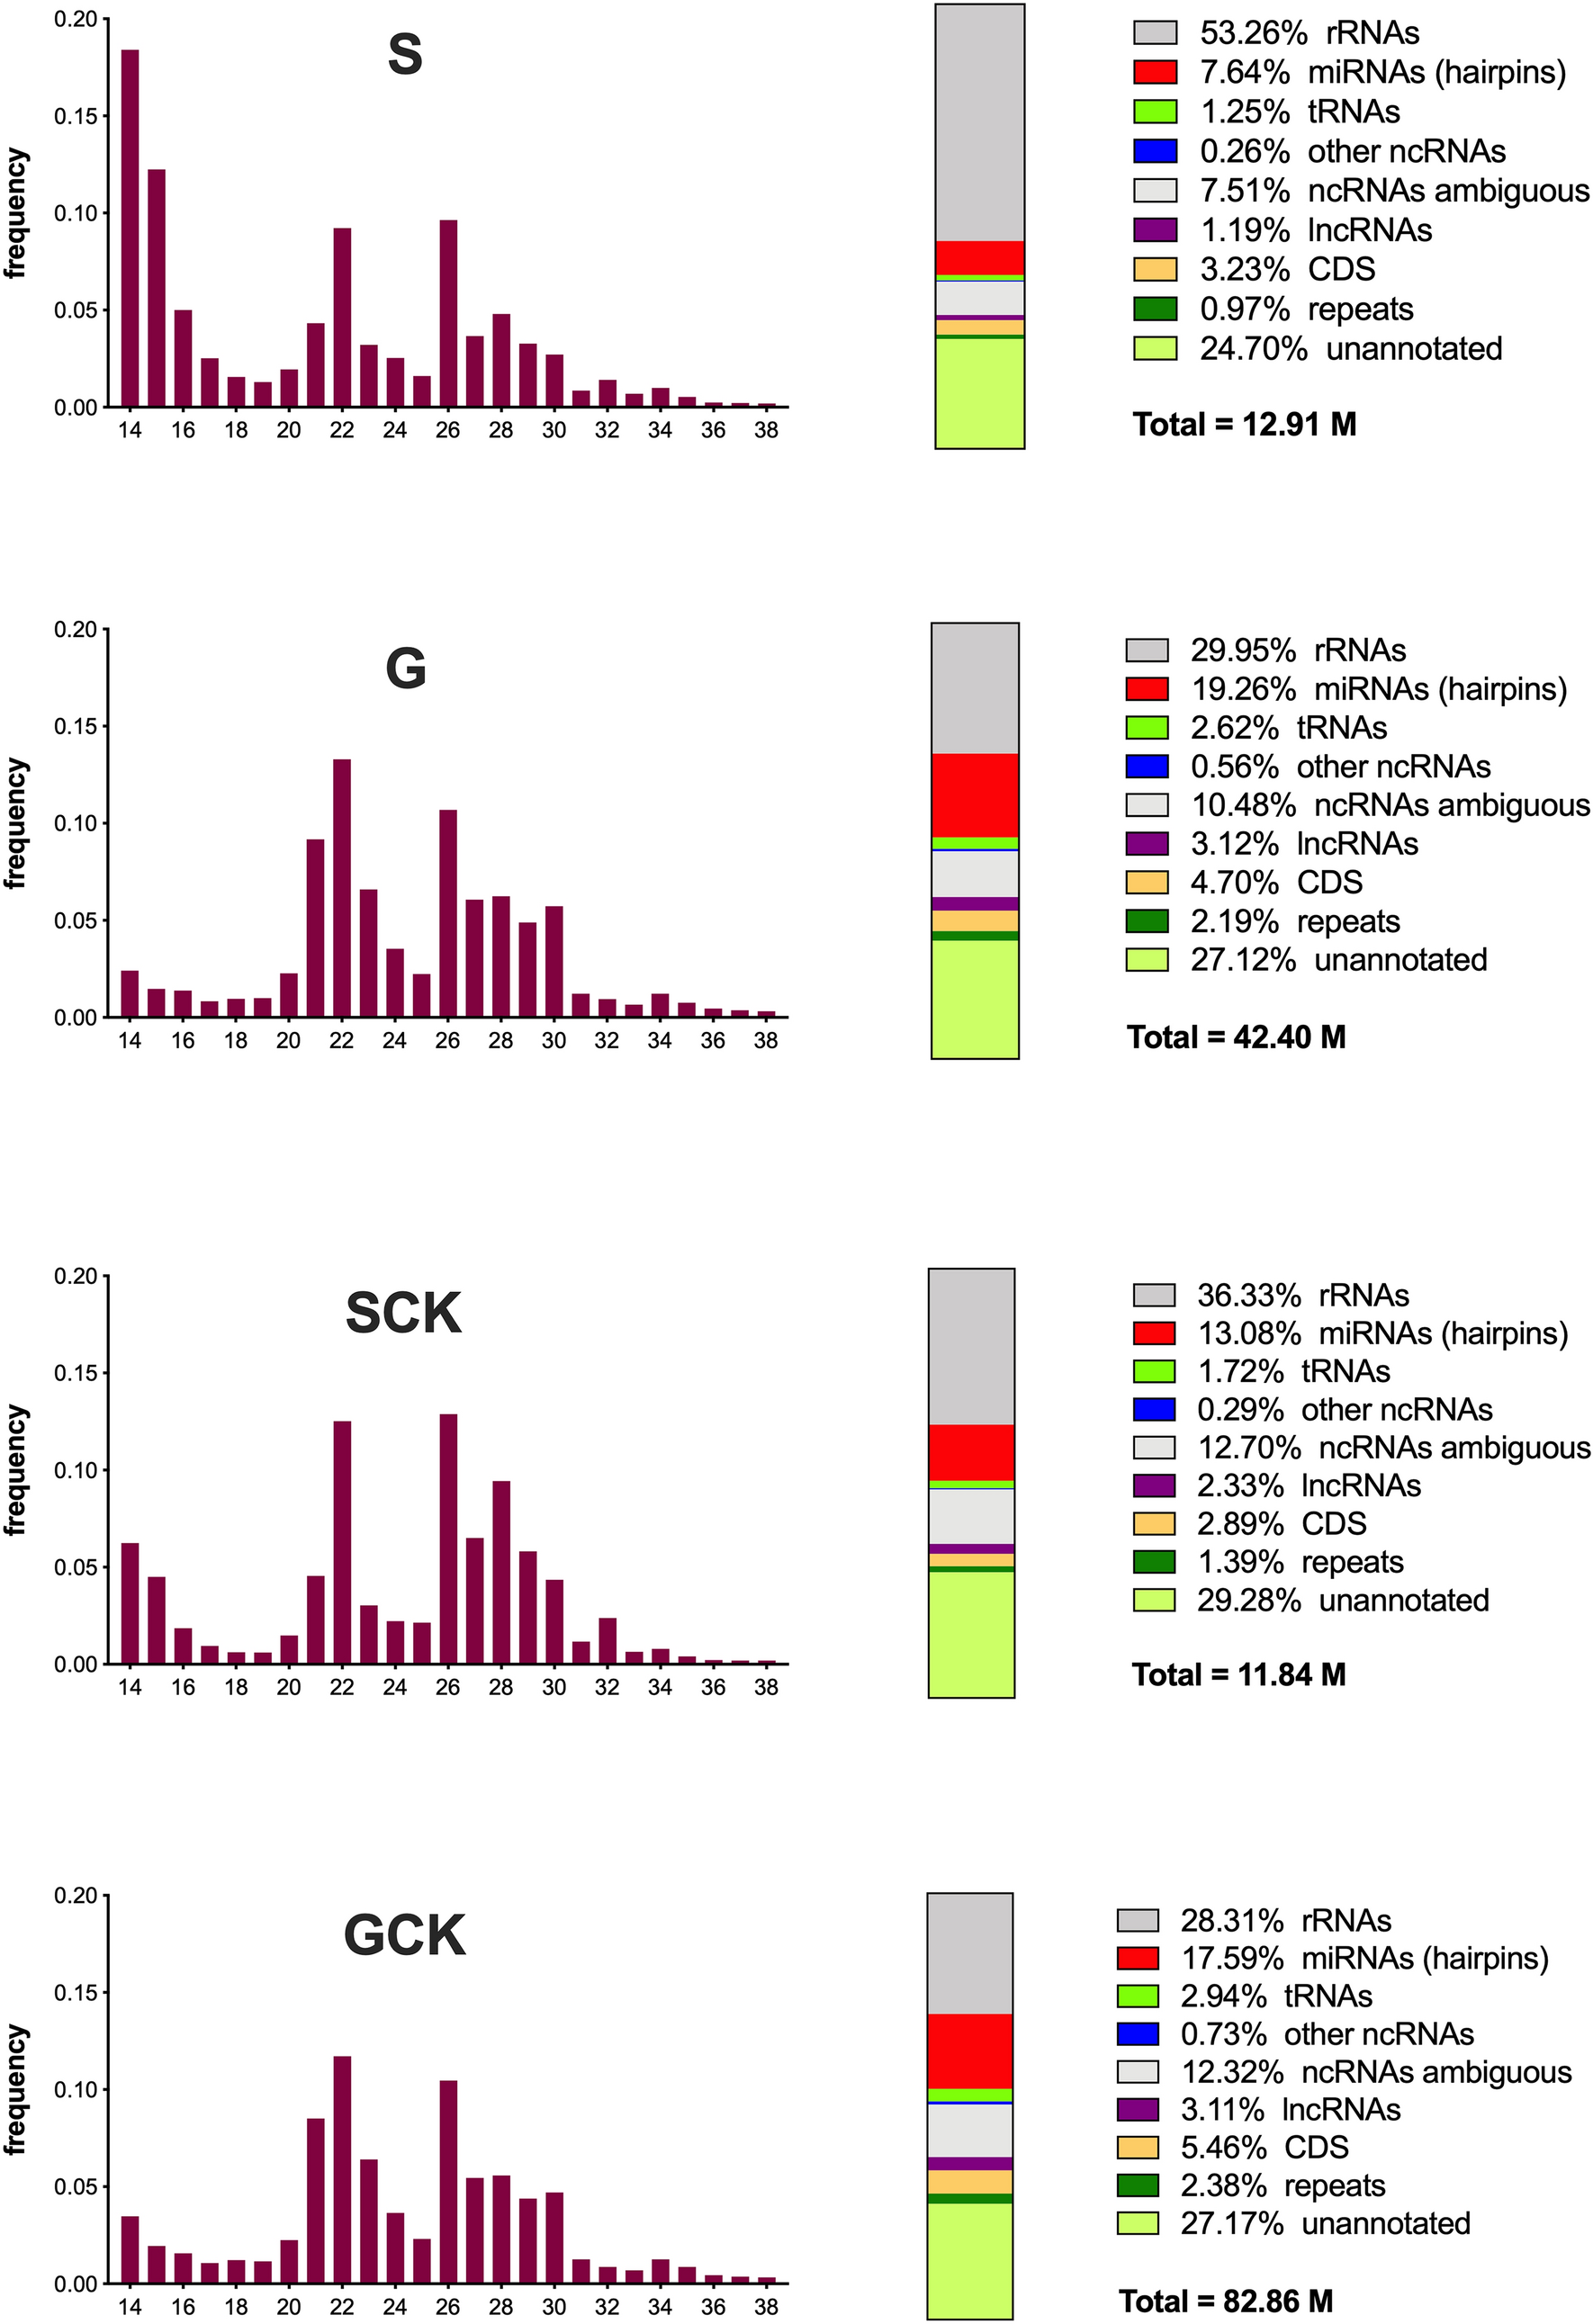 MicroRNAs and other small RNAs in Aedes aegypti saliva and salivary glands  following chikungunya virus infection | Scientific Reports